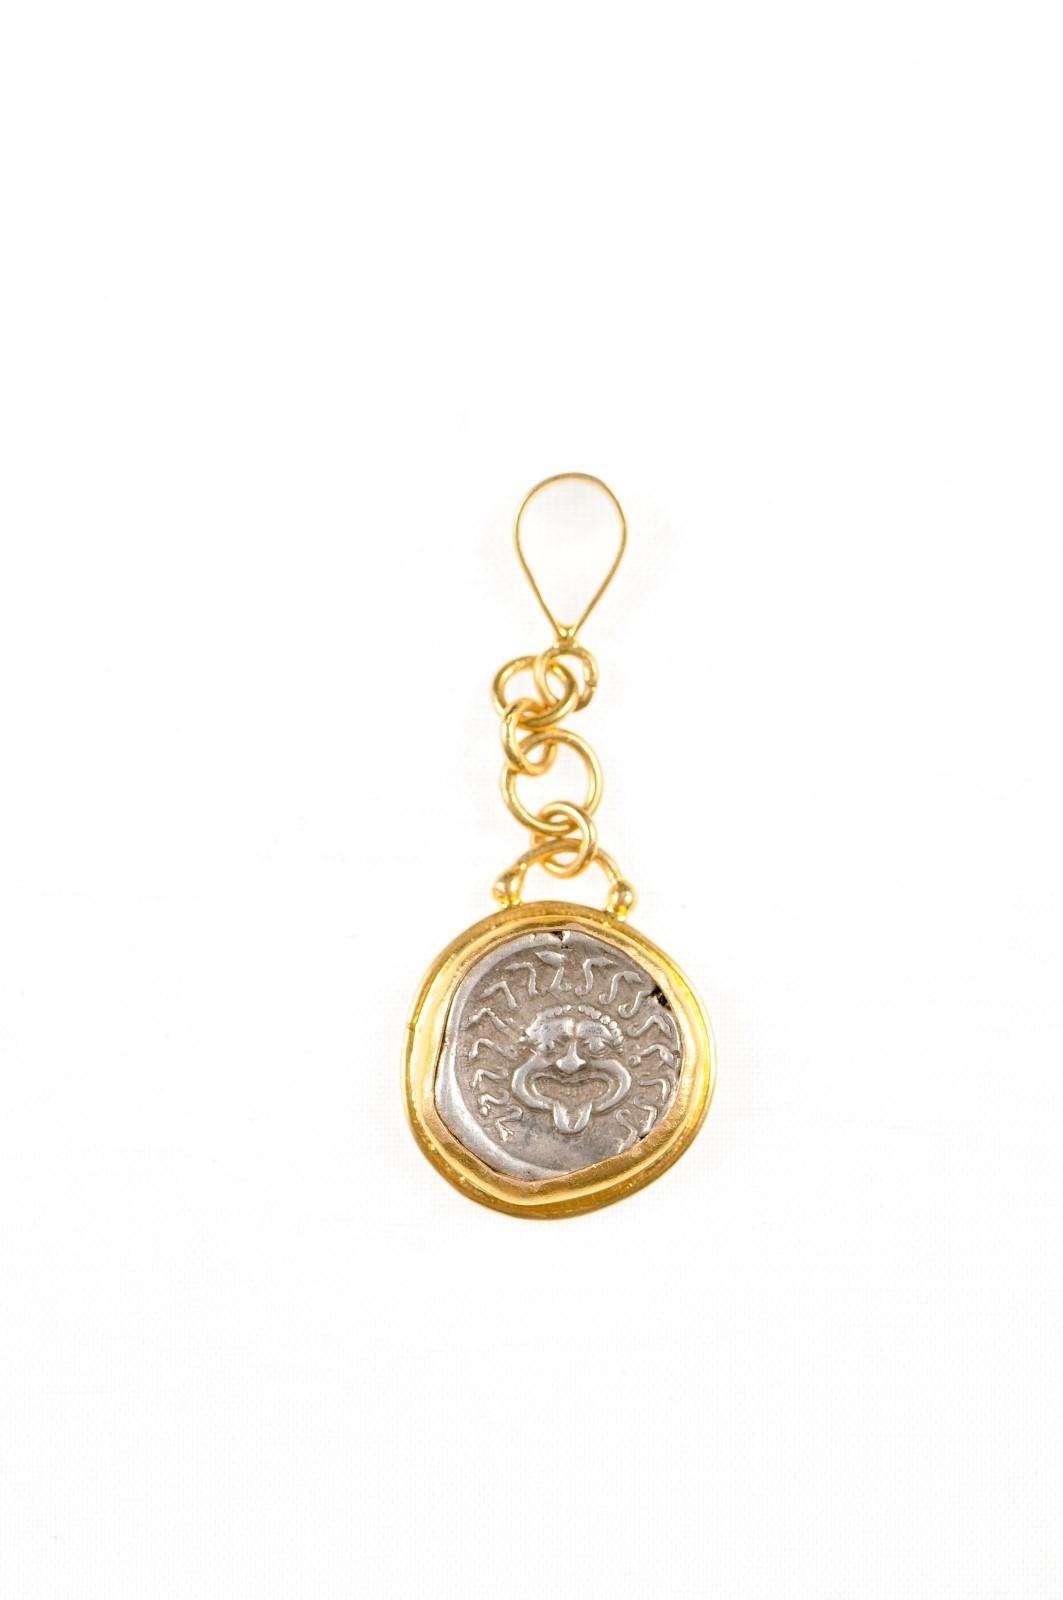 An authentic Greek Apollonia Pontika, AR Drachm Coin (Thrace, circa 450-400 BC), set in a rounded form 22k gold bezel with 22k gold drop linked chain and bail. The obverse, or front, side of this coin features the head of Gorgoneion with a